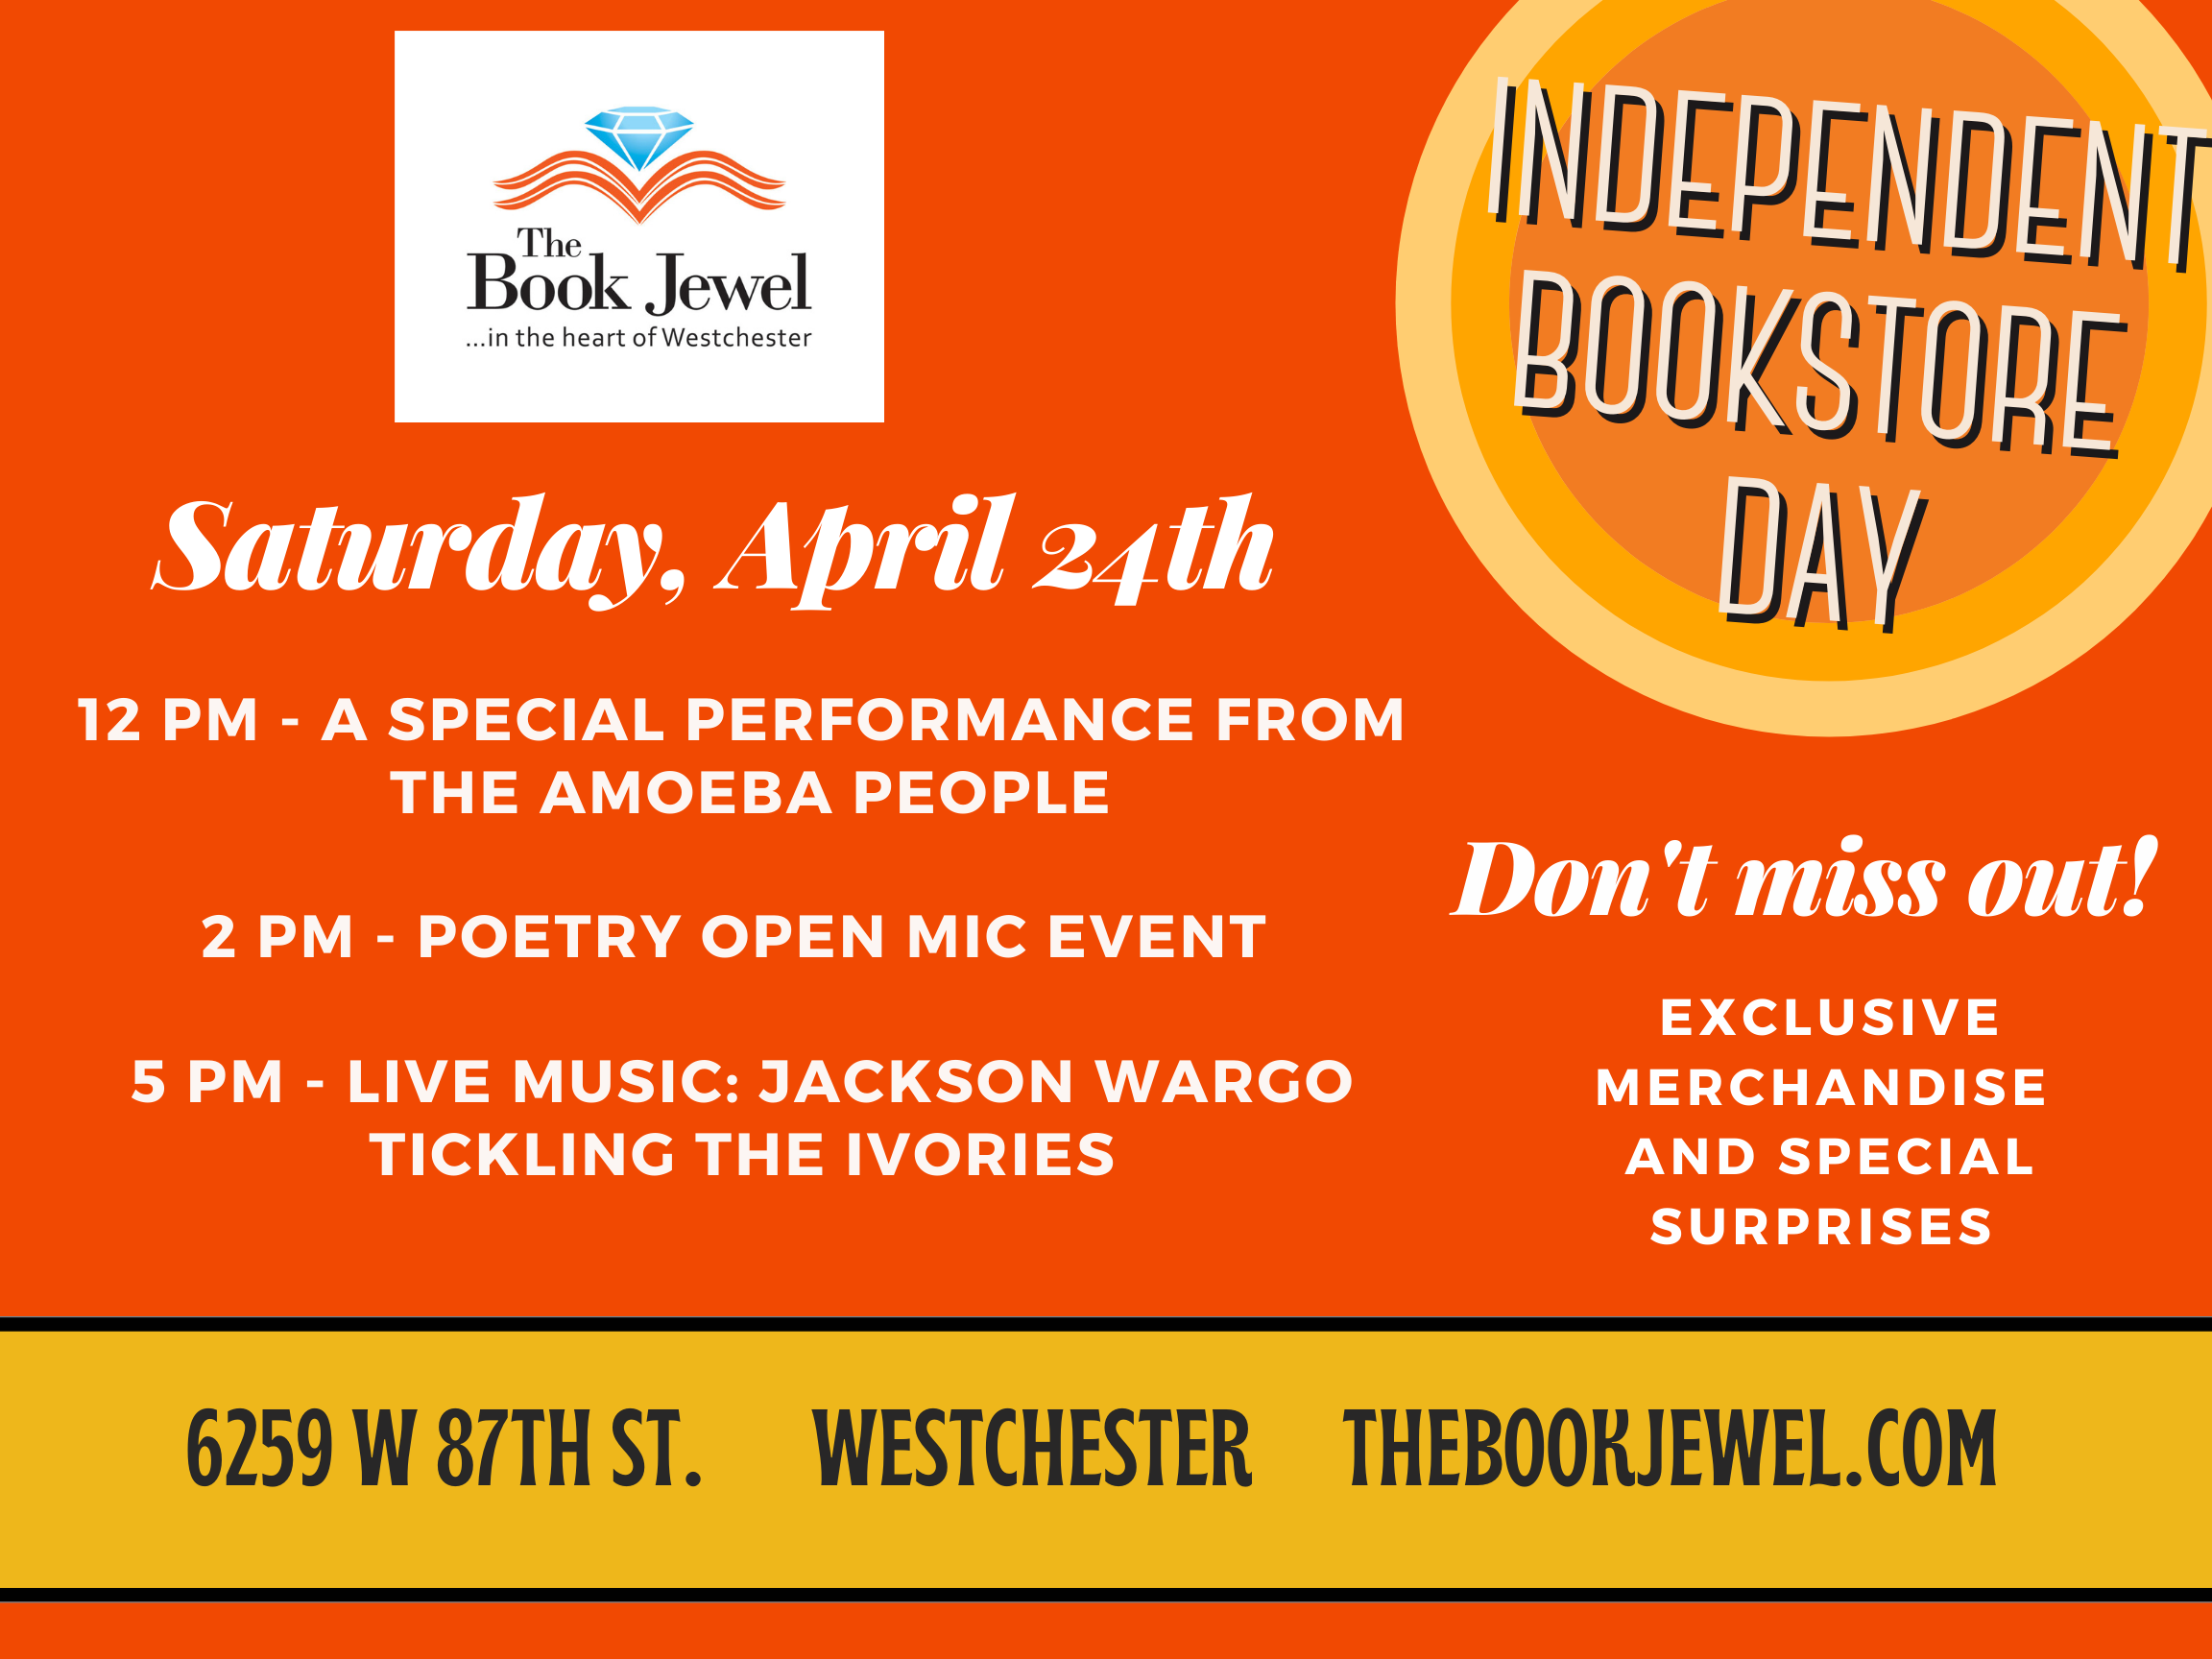 Independent bookstore day